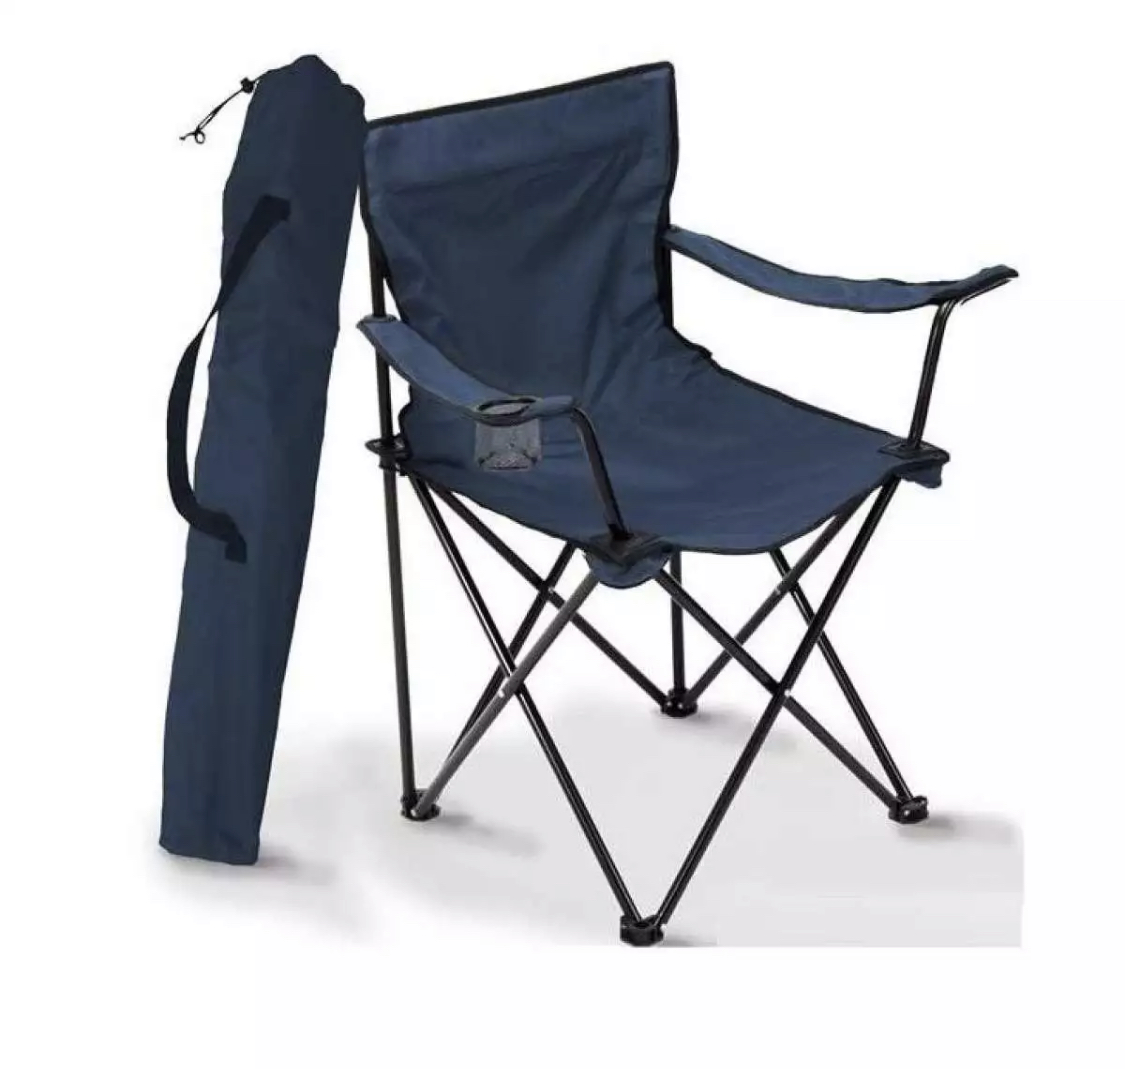 Buy Latest Camp Furniture at Best Price 